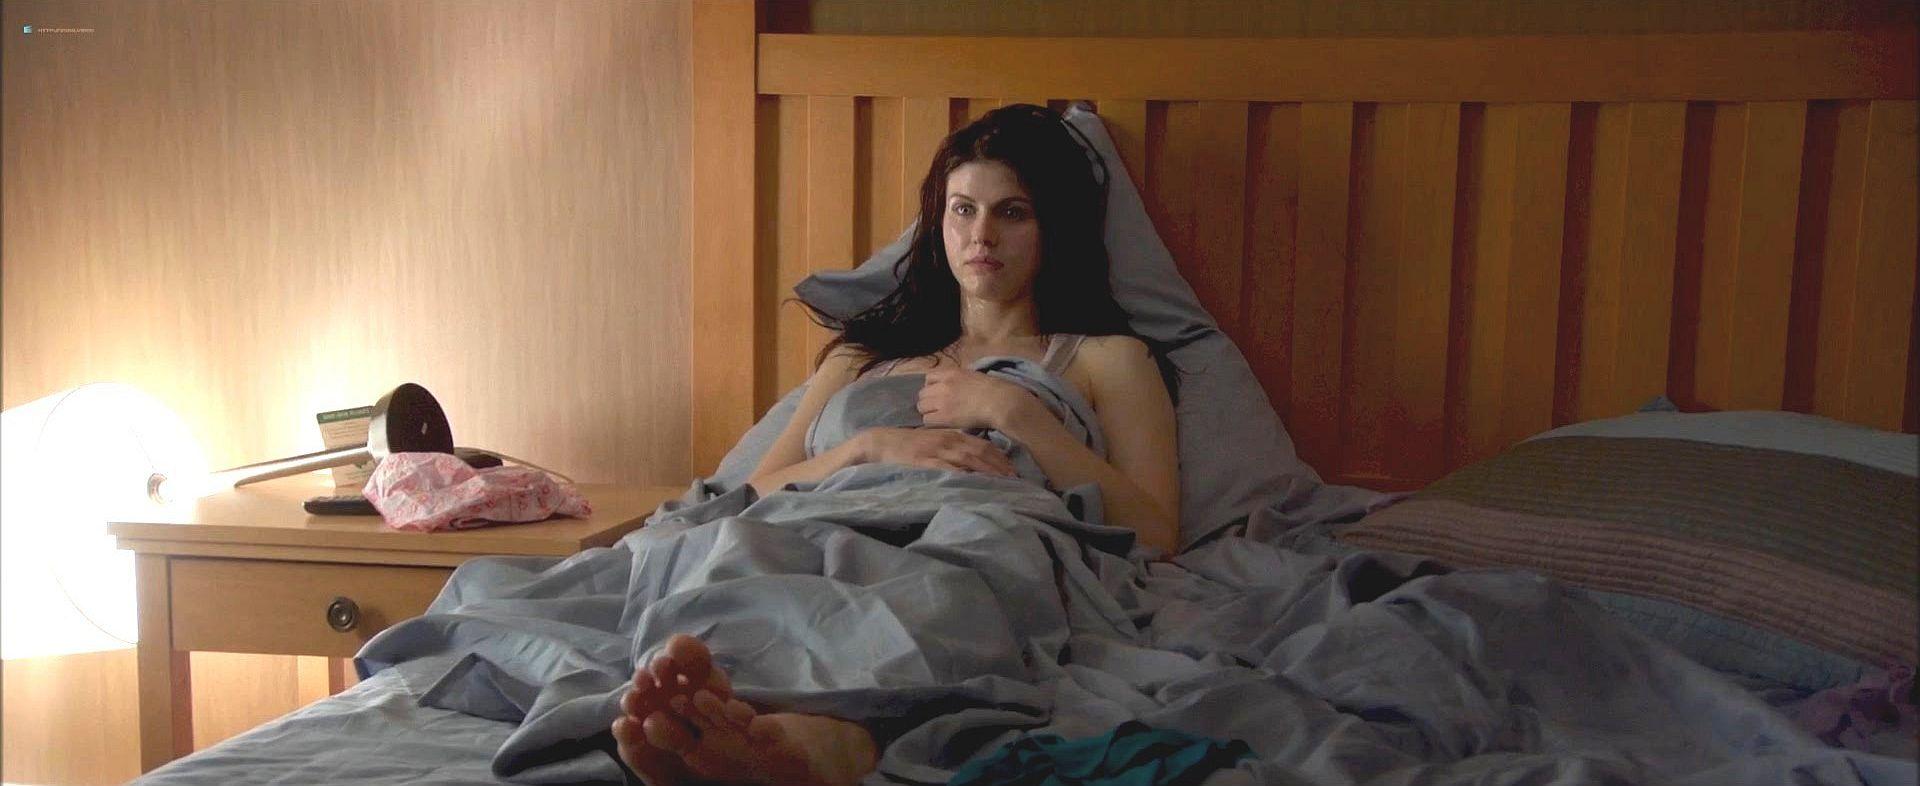 49 Sexy Alexandra Daddario Feet Pictures Will Drive You Nuts For Her | Best Of Comic Books